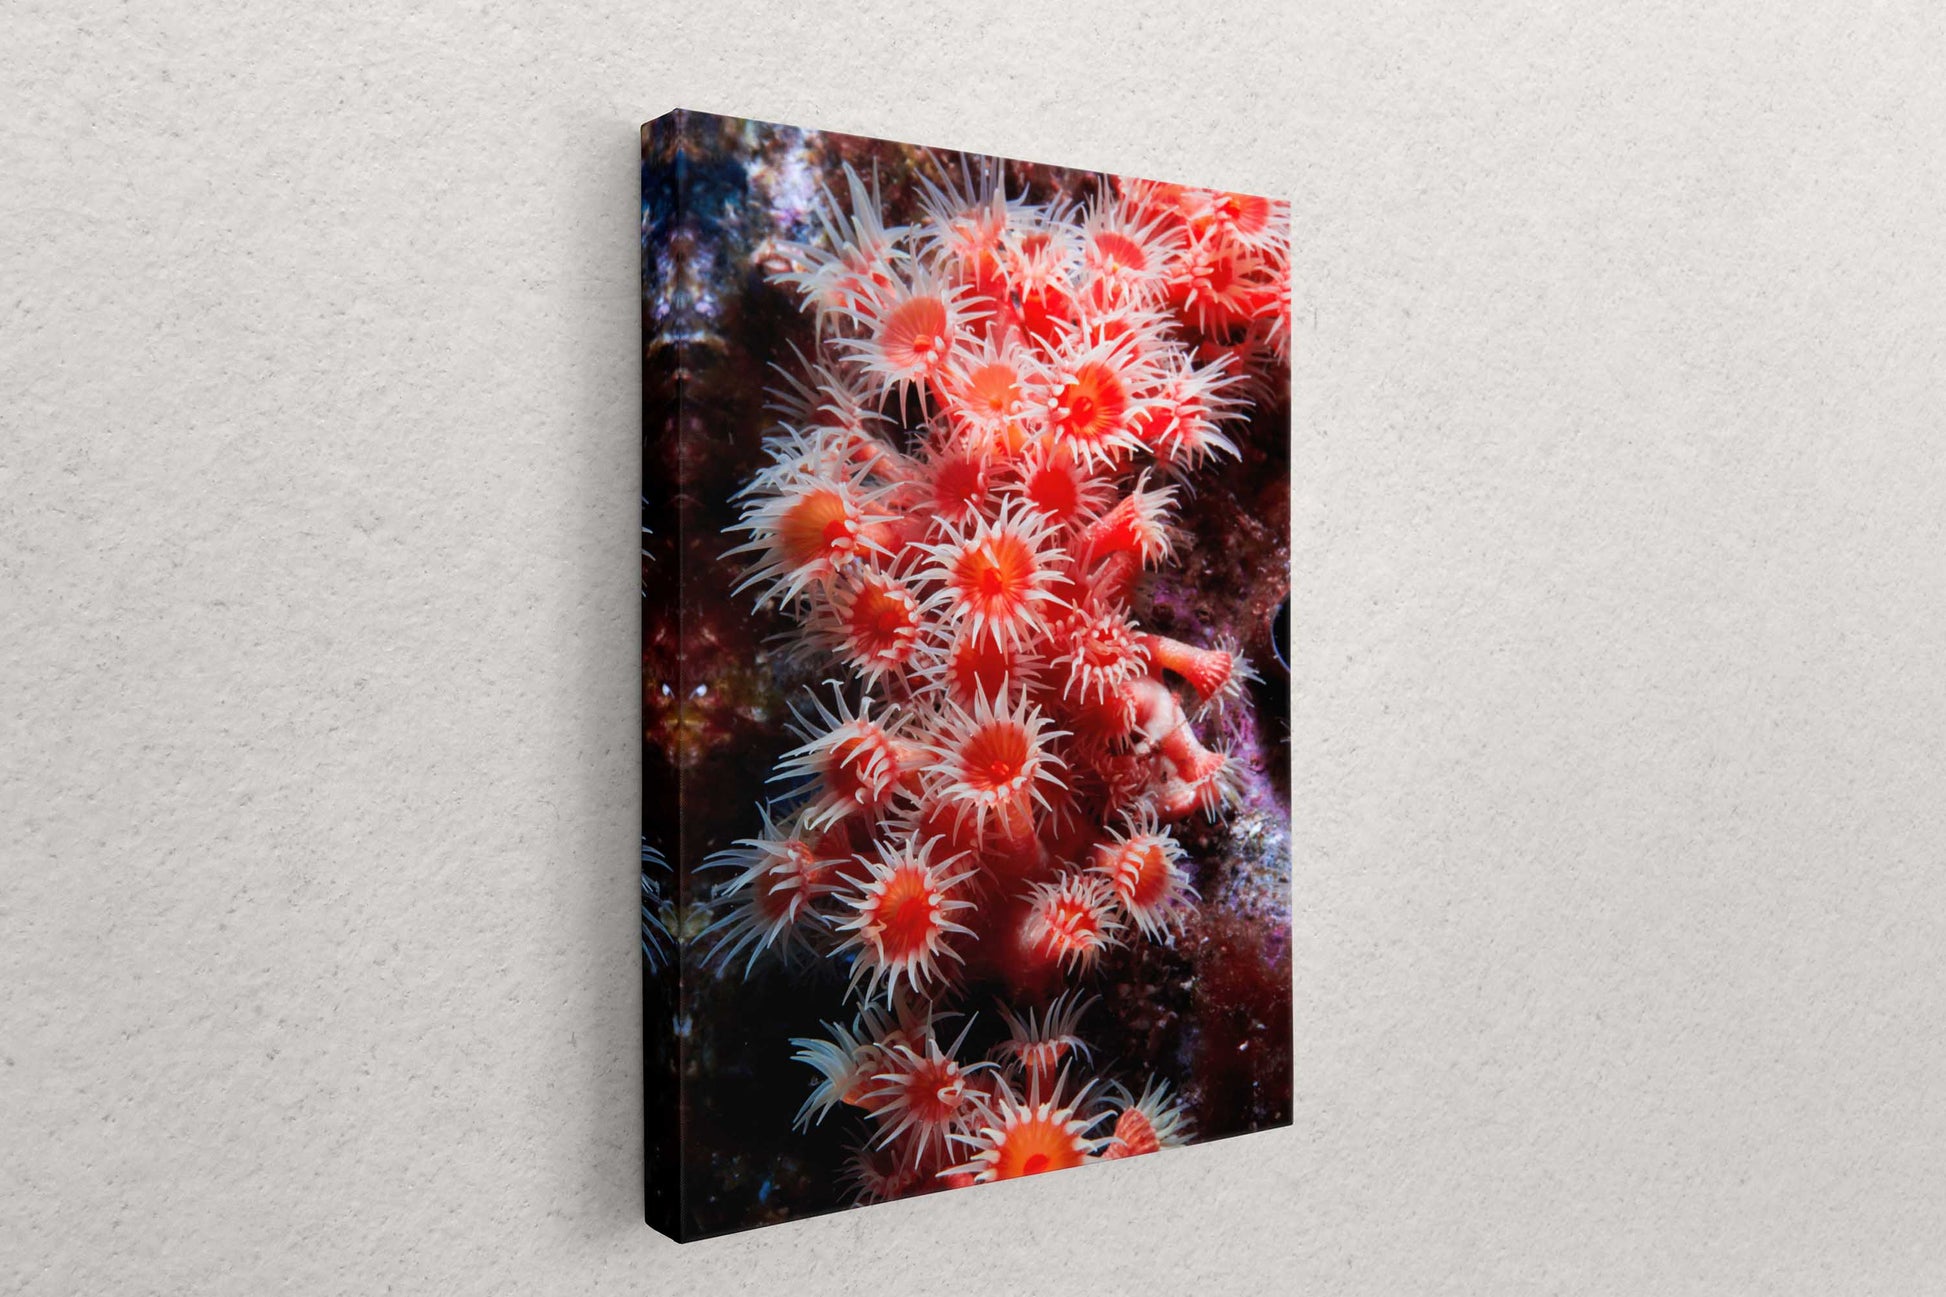 Side view of a canvas showing a red zoanthid underwater photo print leaning against a white wall.